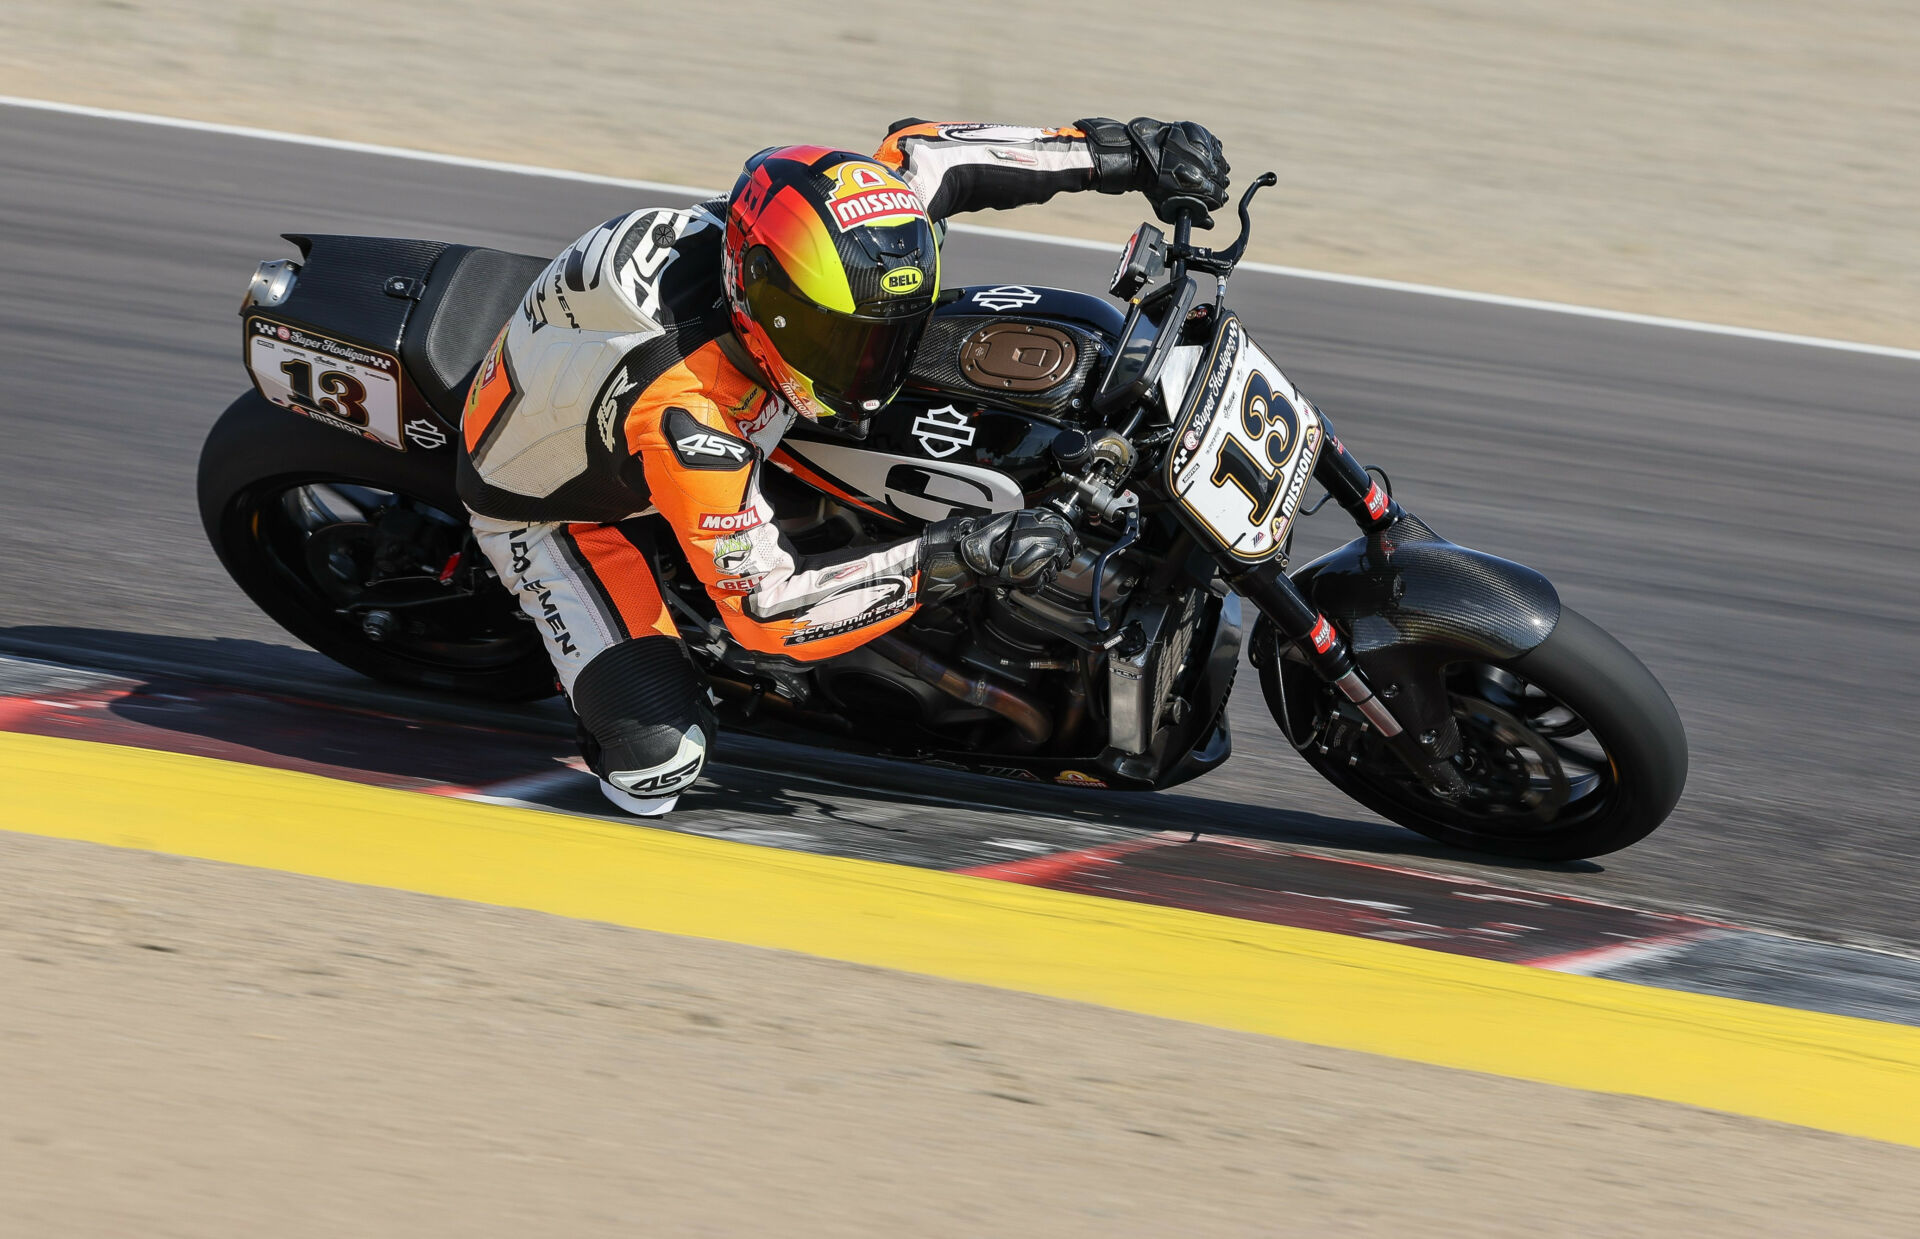 Cory West (13) at speed on his Team Saddlemen Harley-Davidson Pan America. Photo by Brian J. Nelson.